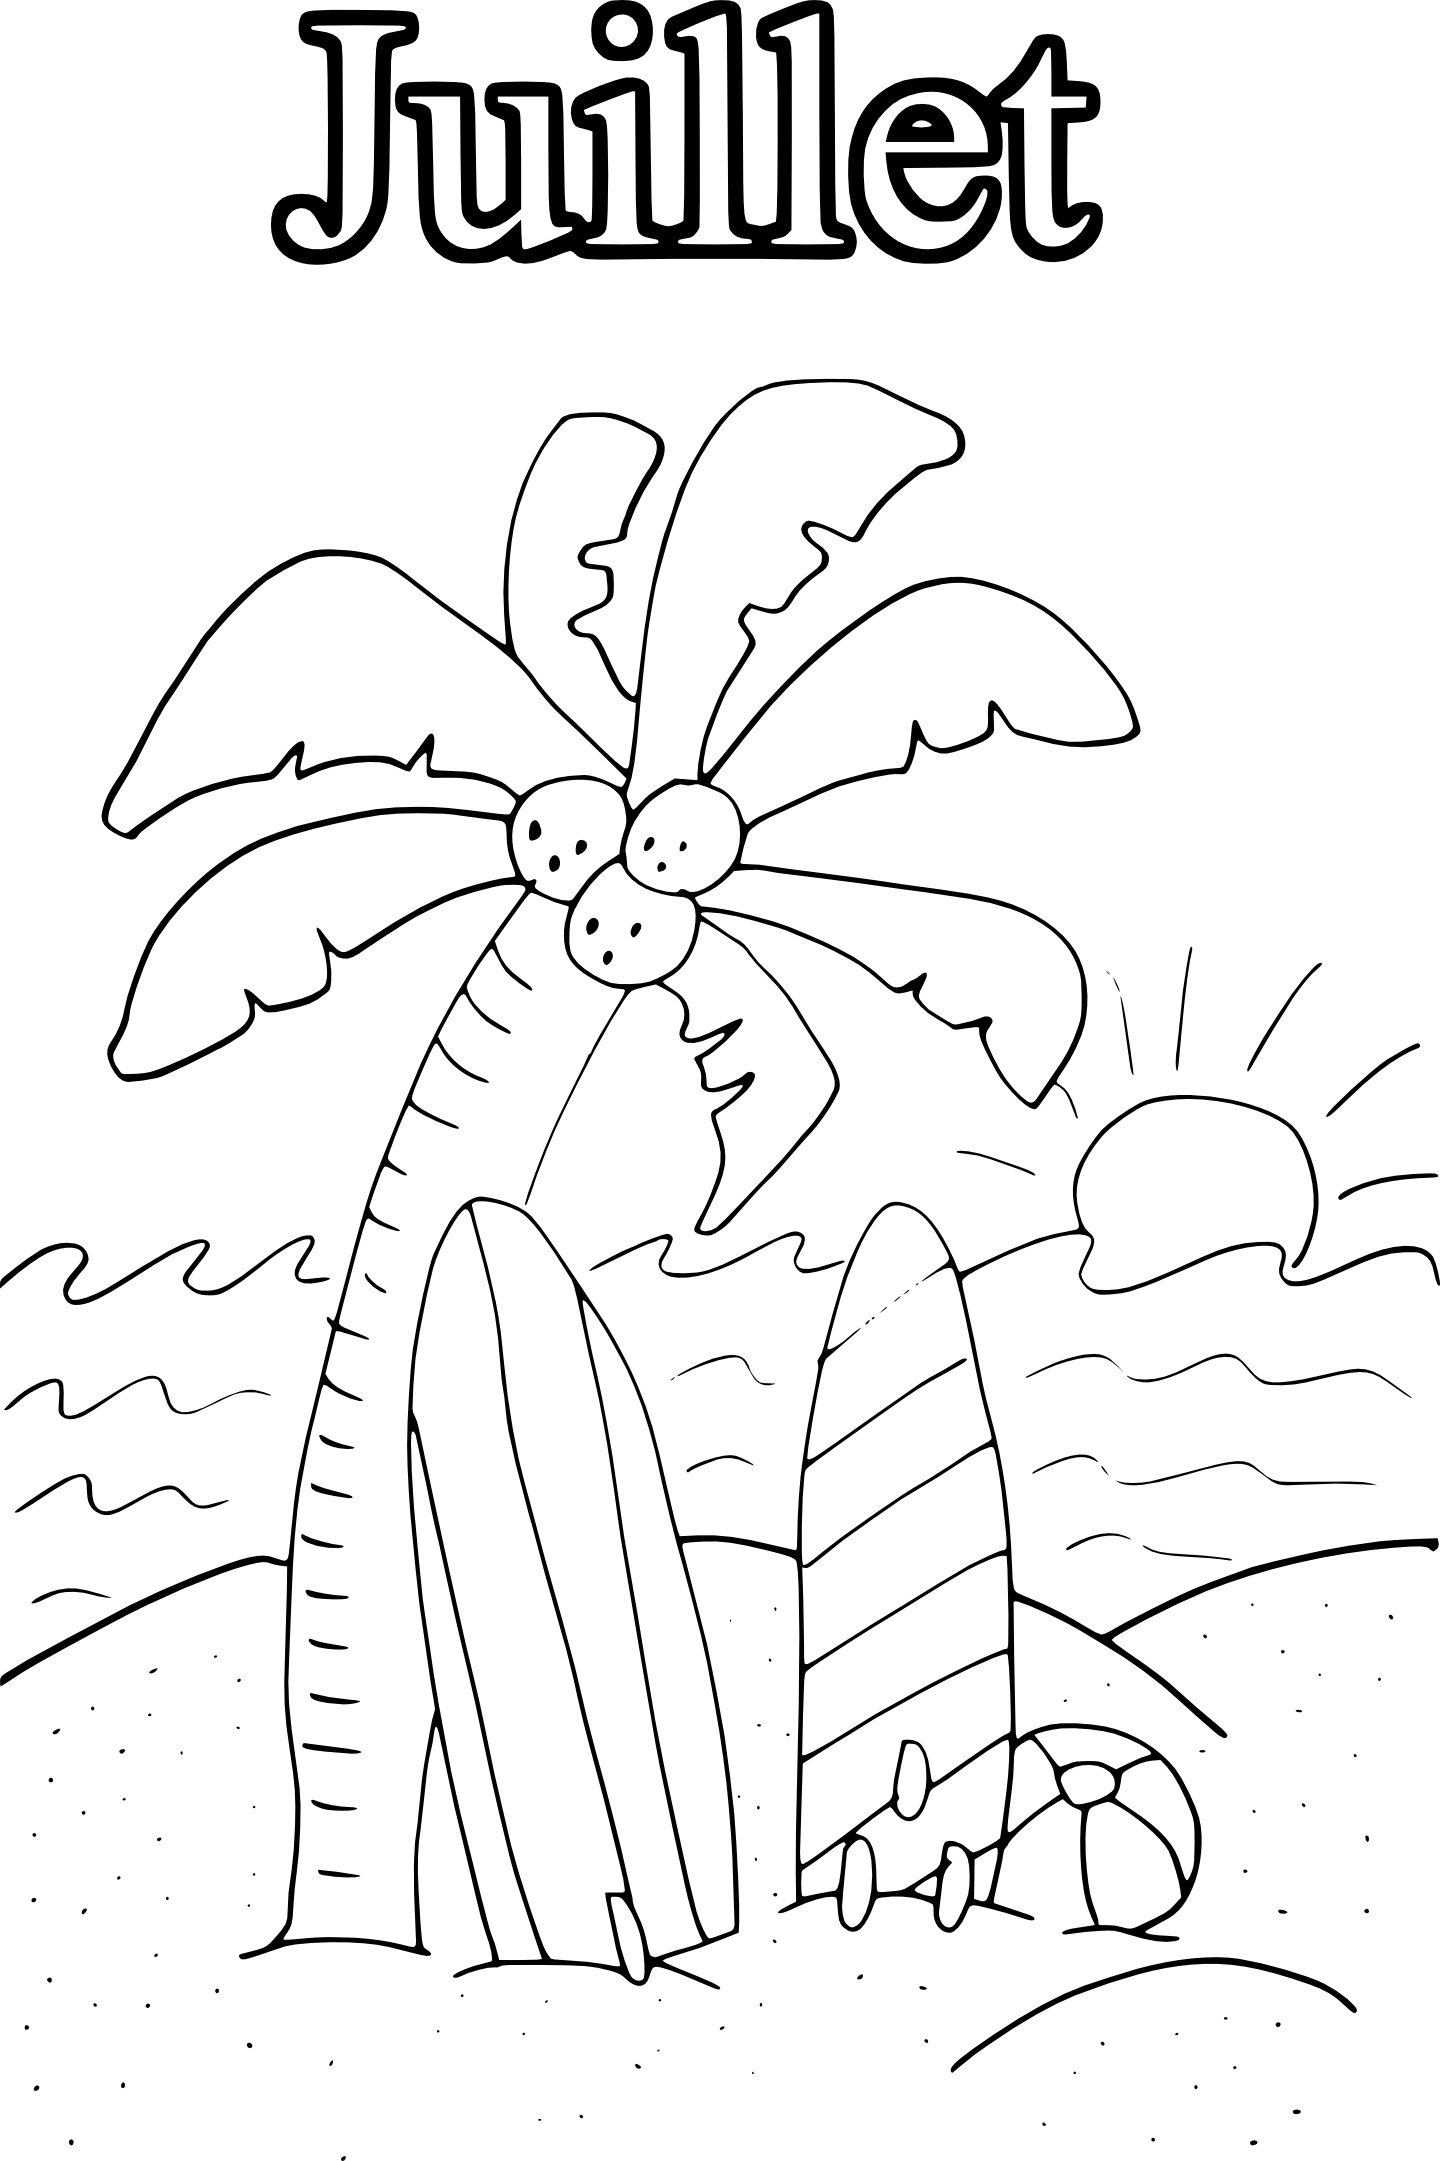 Month Of July coloring page